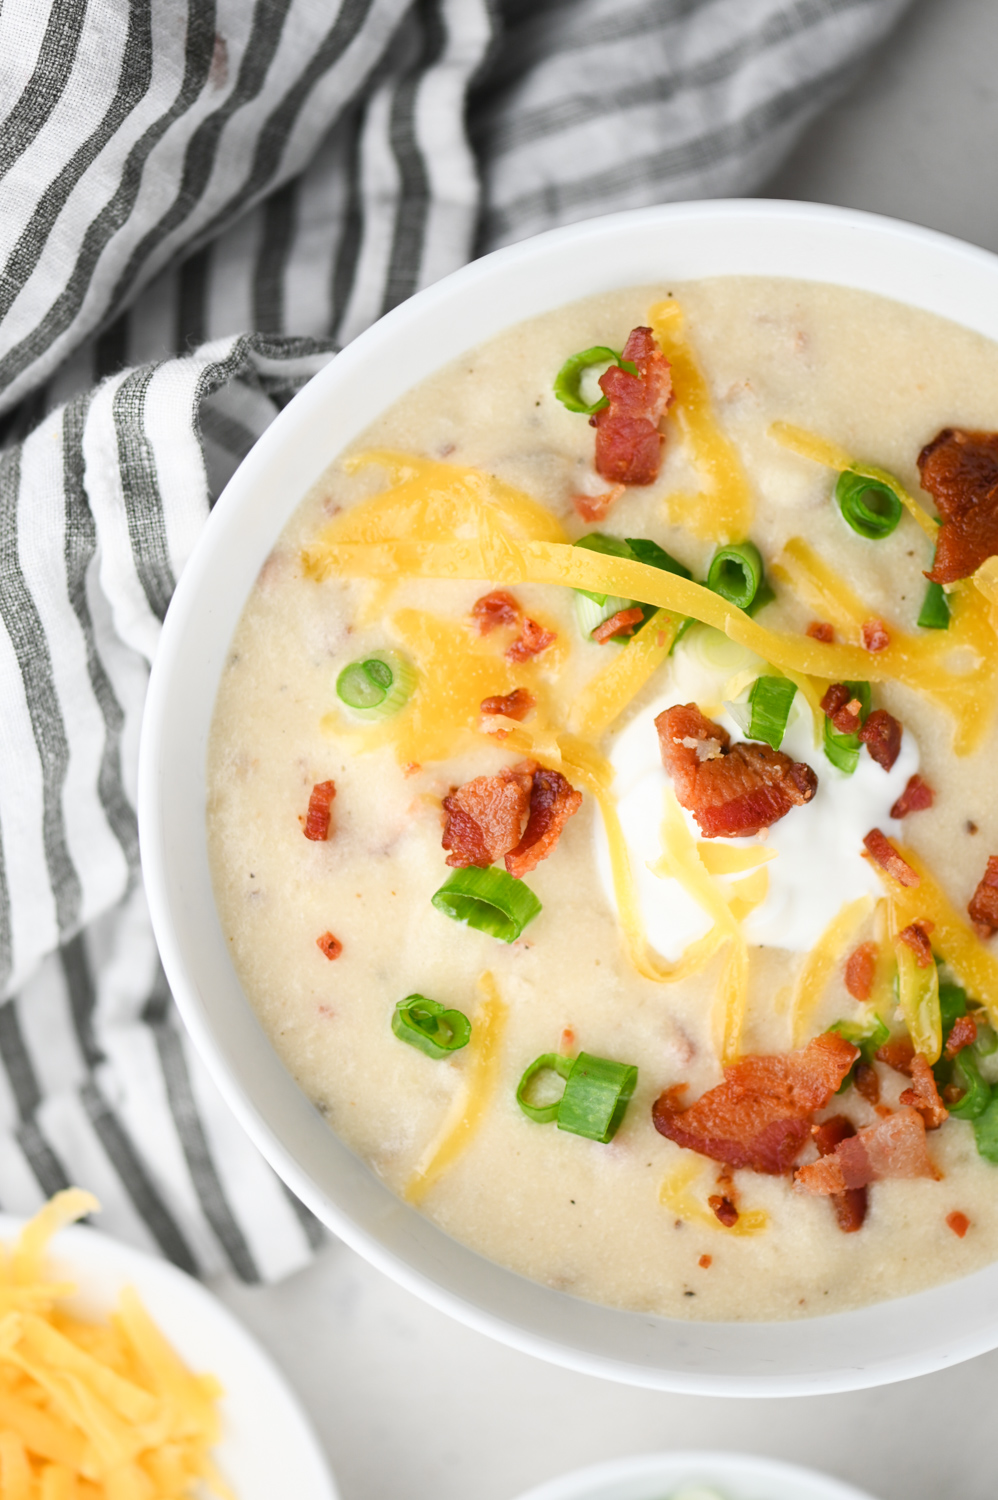 Loaded Baked Potato Soup Recipe That's So Easy! - Fun Cheap or Free